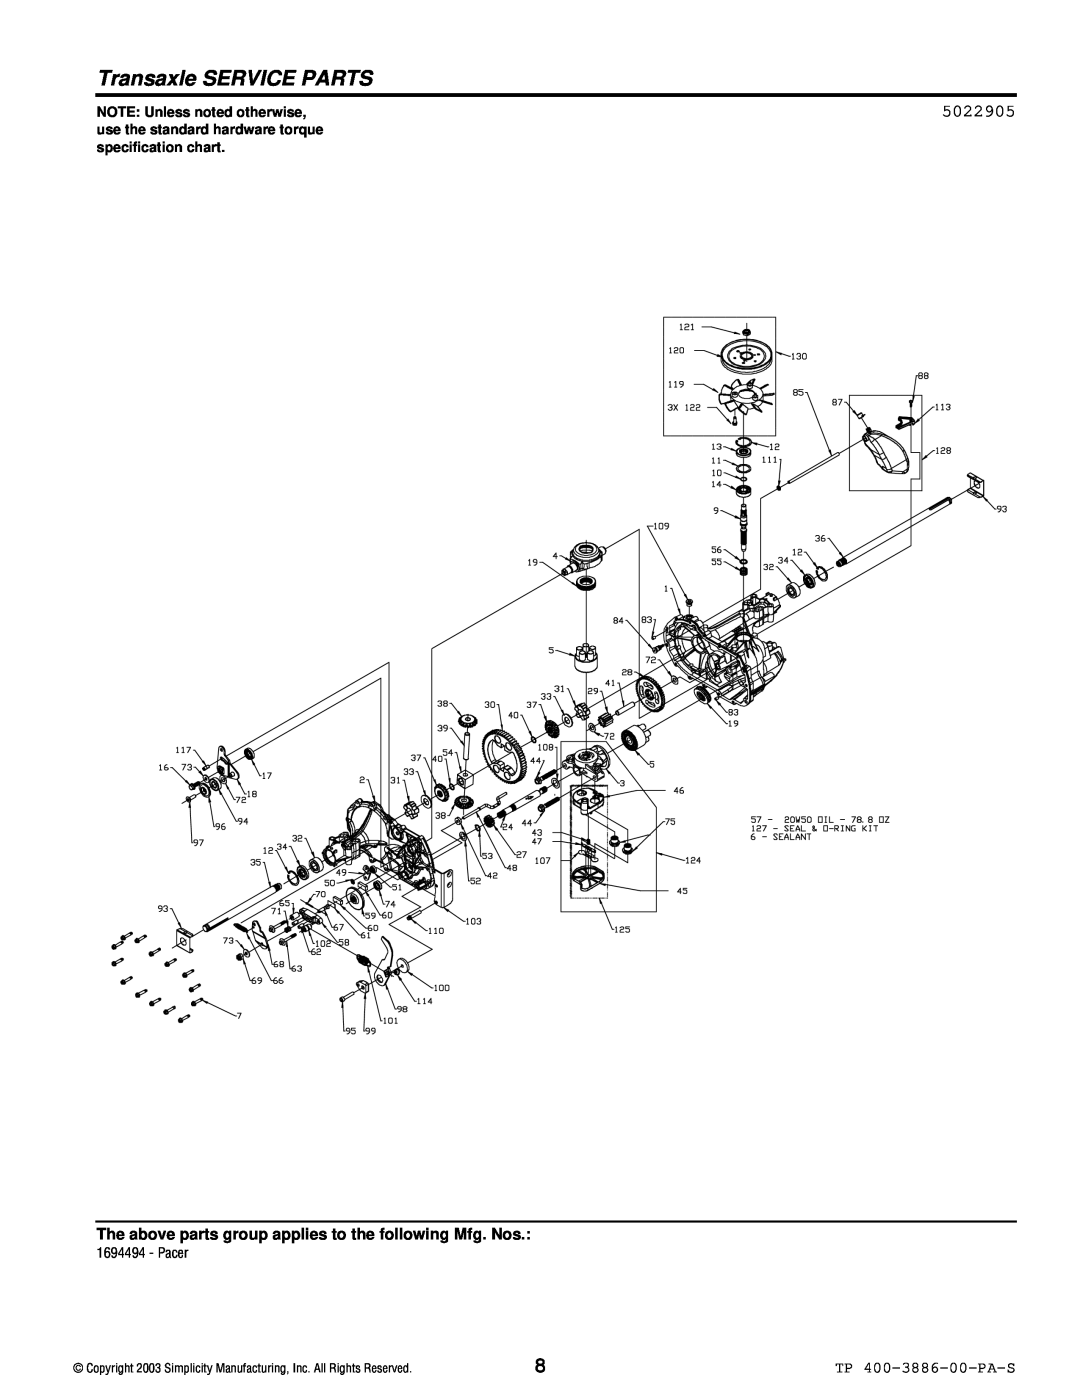 Simplicity Series Transaxle manual Transaxle SERVICE PARTS, 5022905, TP 400-3886-00-PA-S, NOTE Unless noted otherwise 